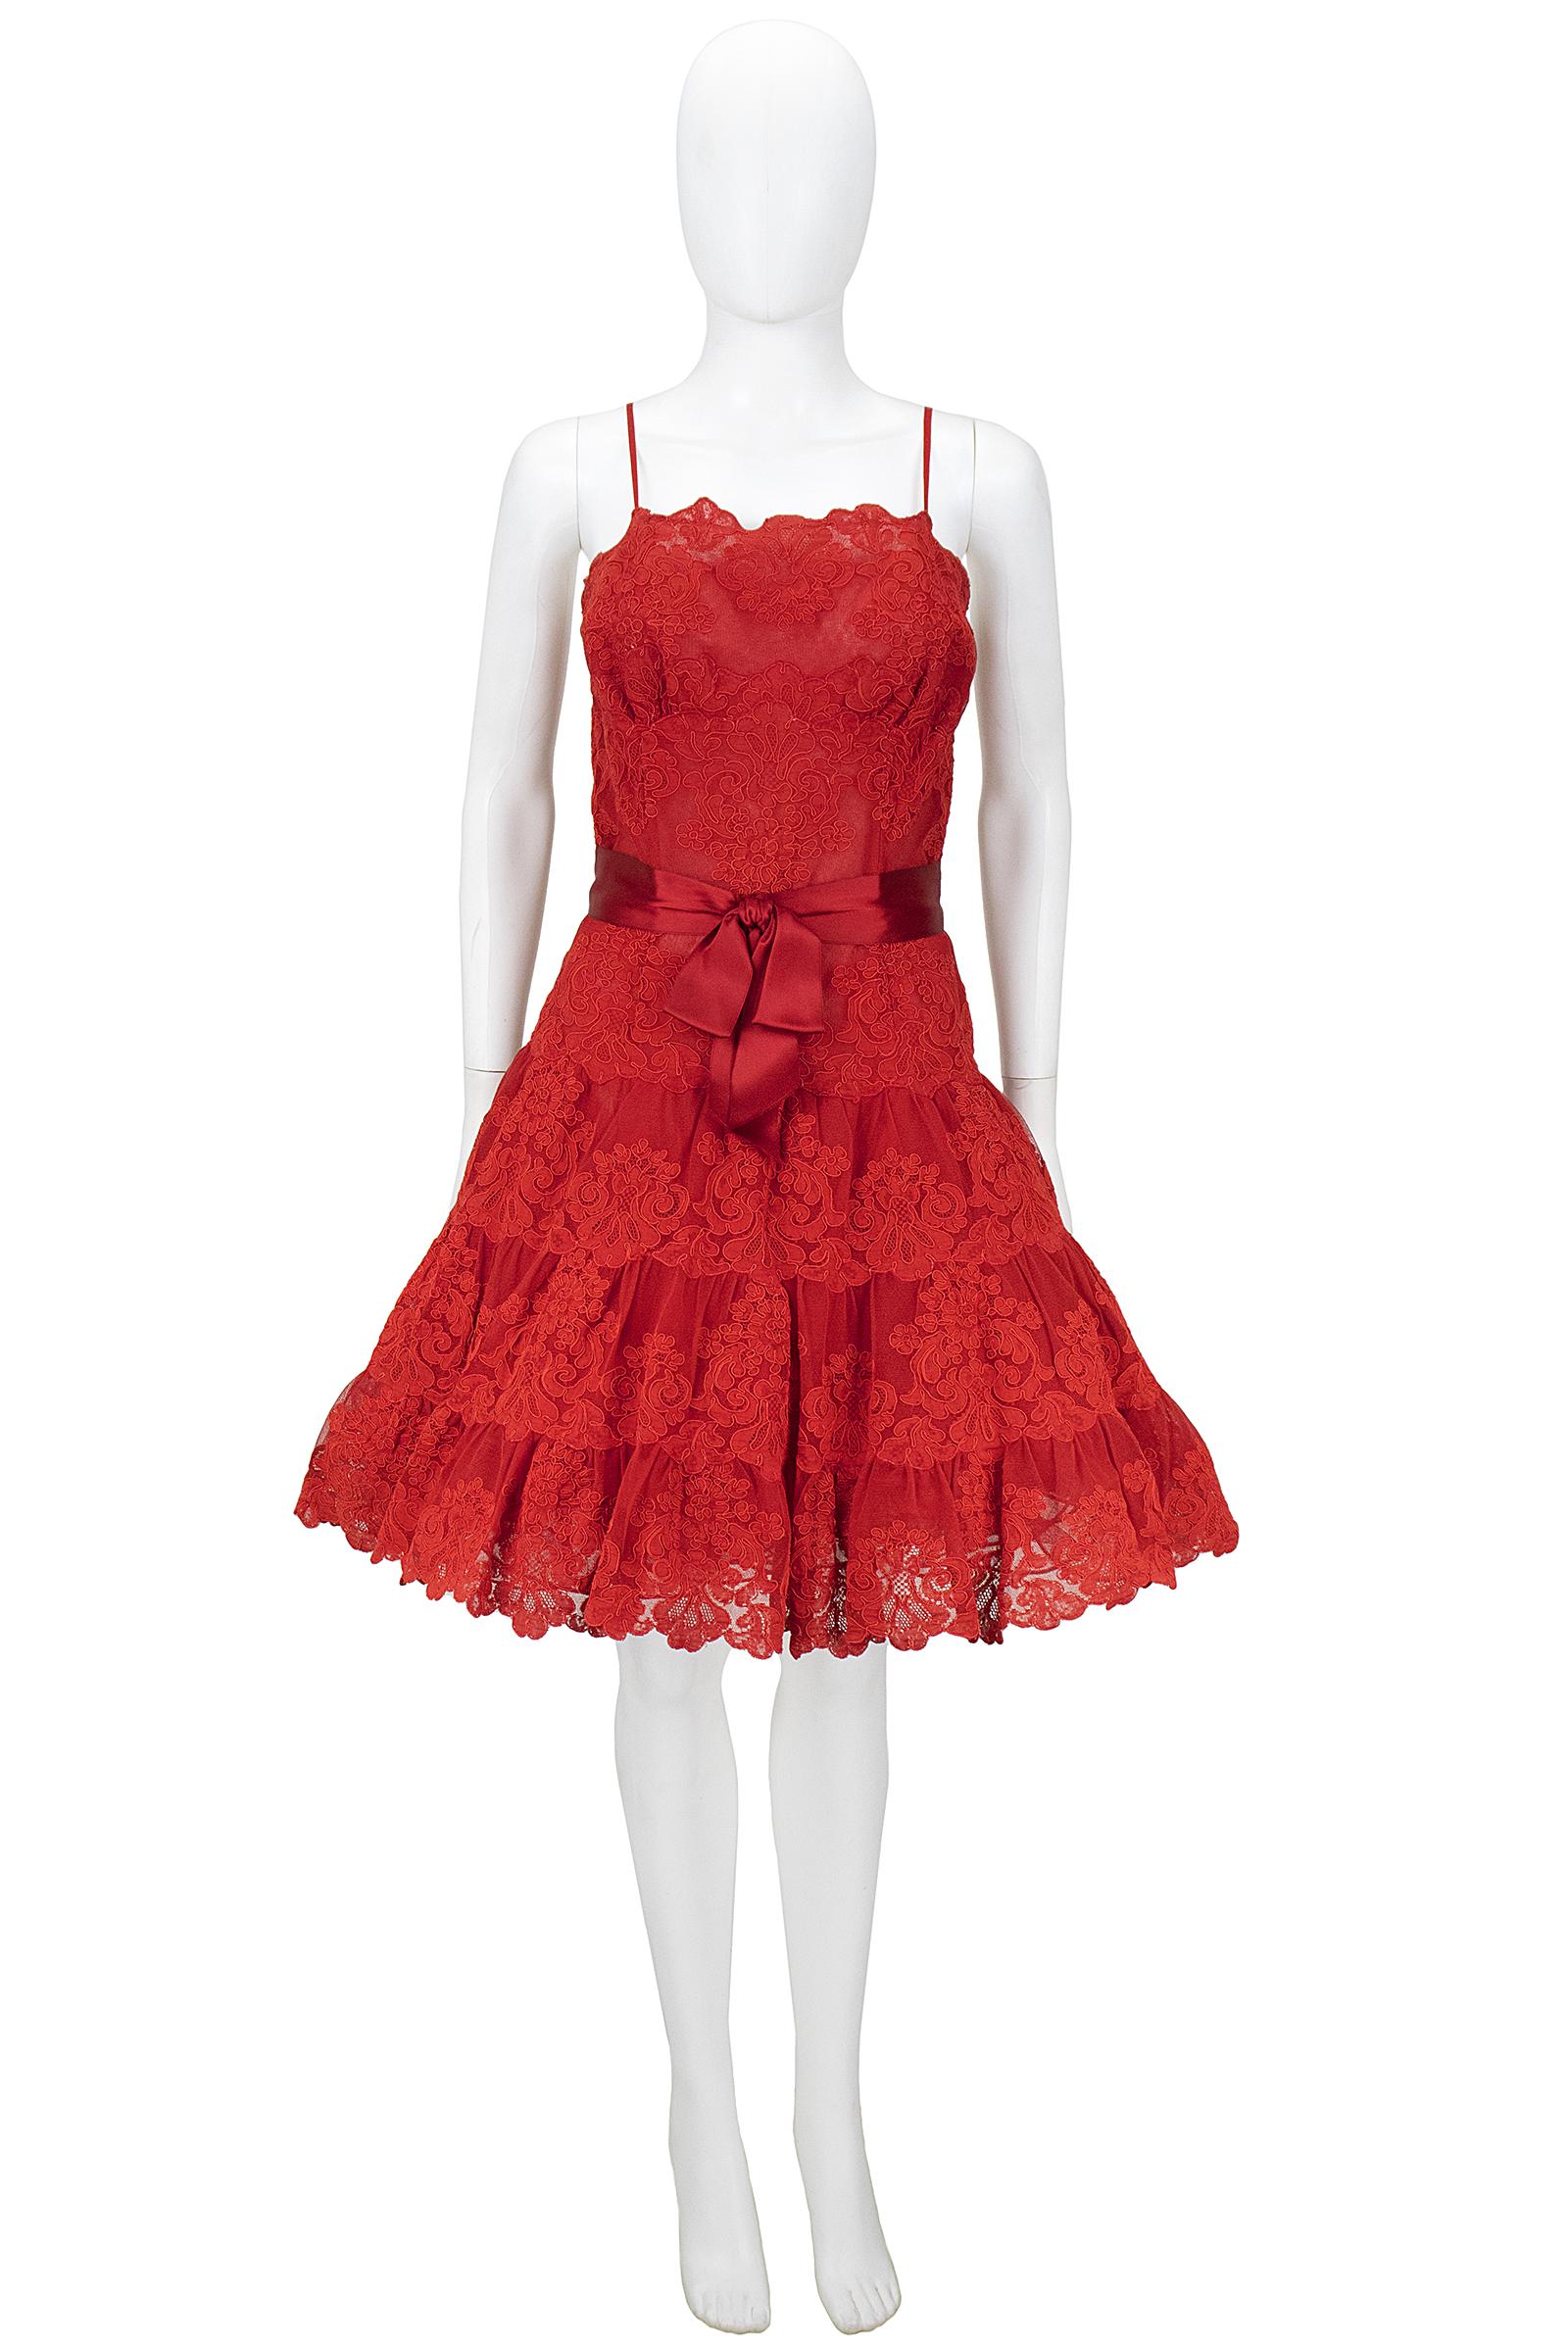 Vicky Tiel Couture cocktail dress
Red lace with tulle underskirt 
Red ribbon bow at the waist 
Back zipper and hook and eye closure 
Made in Paris

*Please feel free to contact us with the 